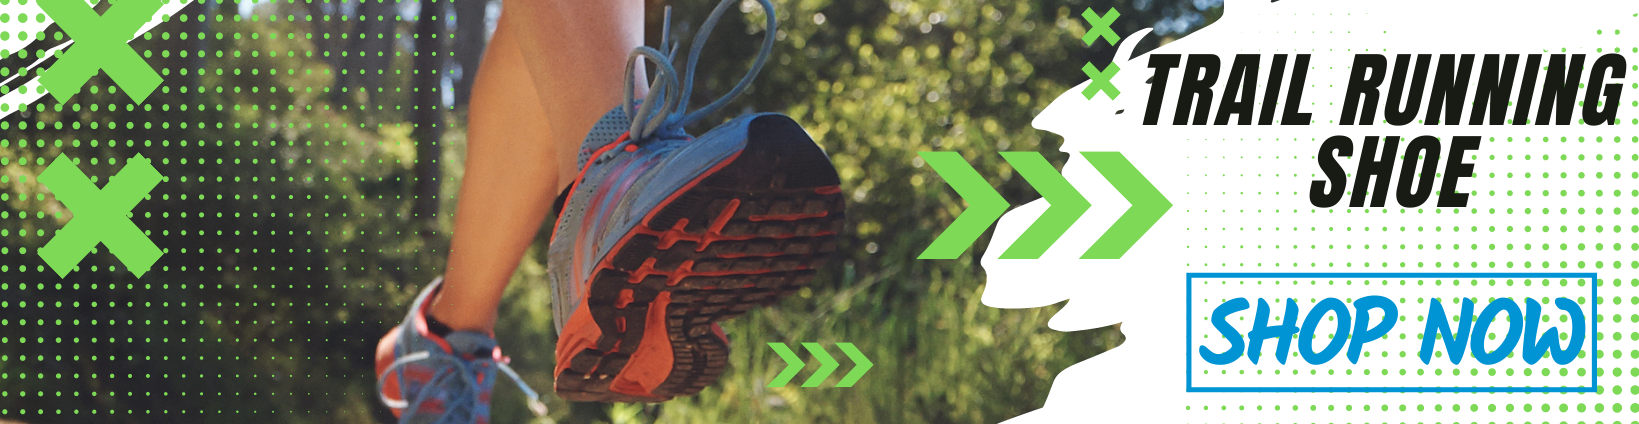 buy trail running shoes in perth australia